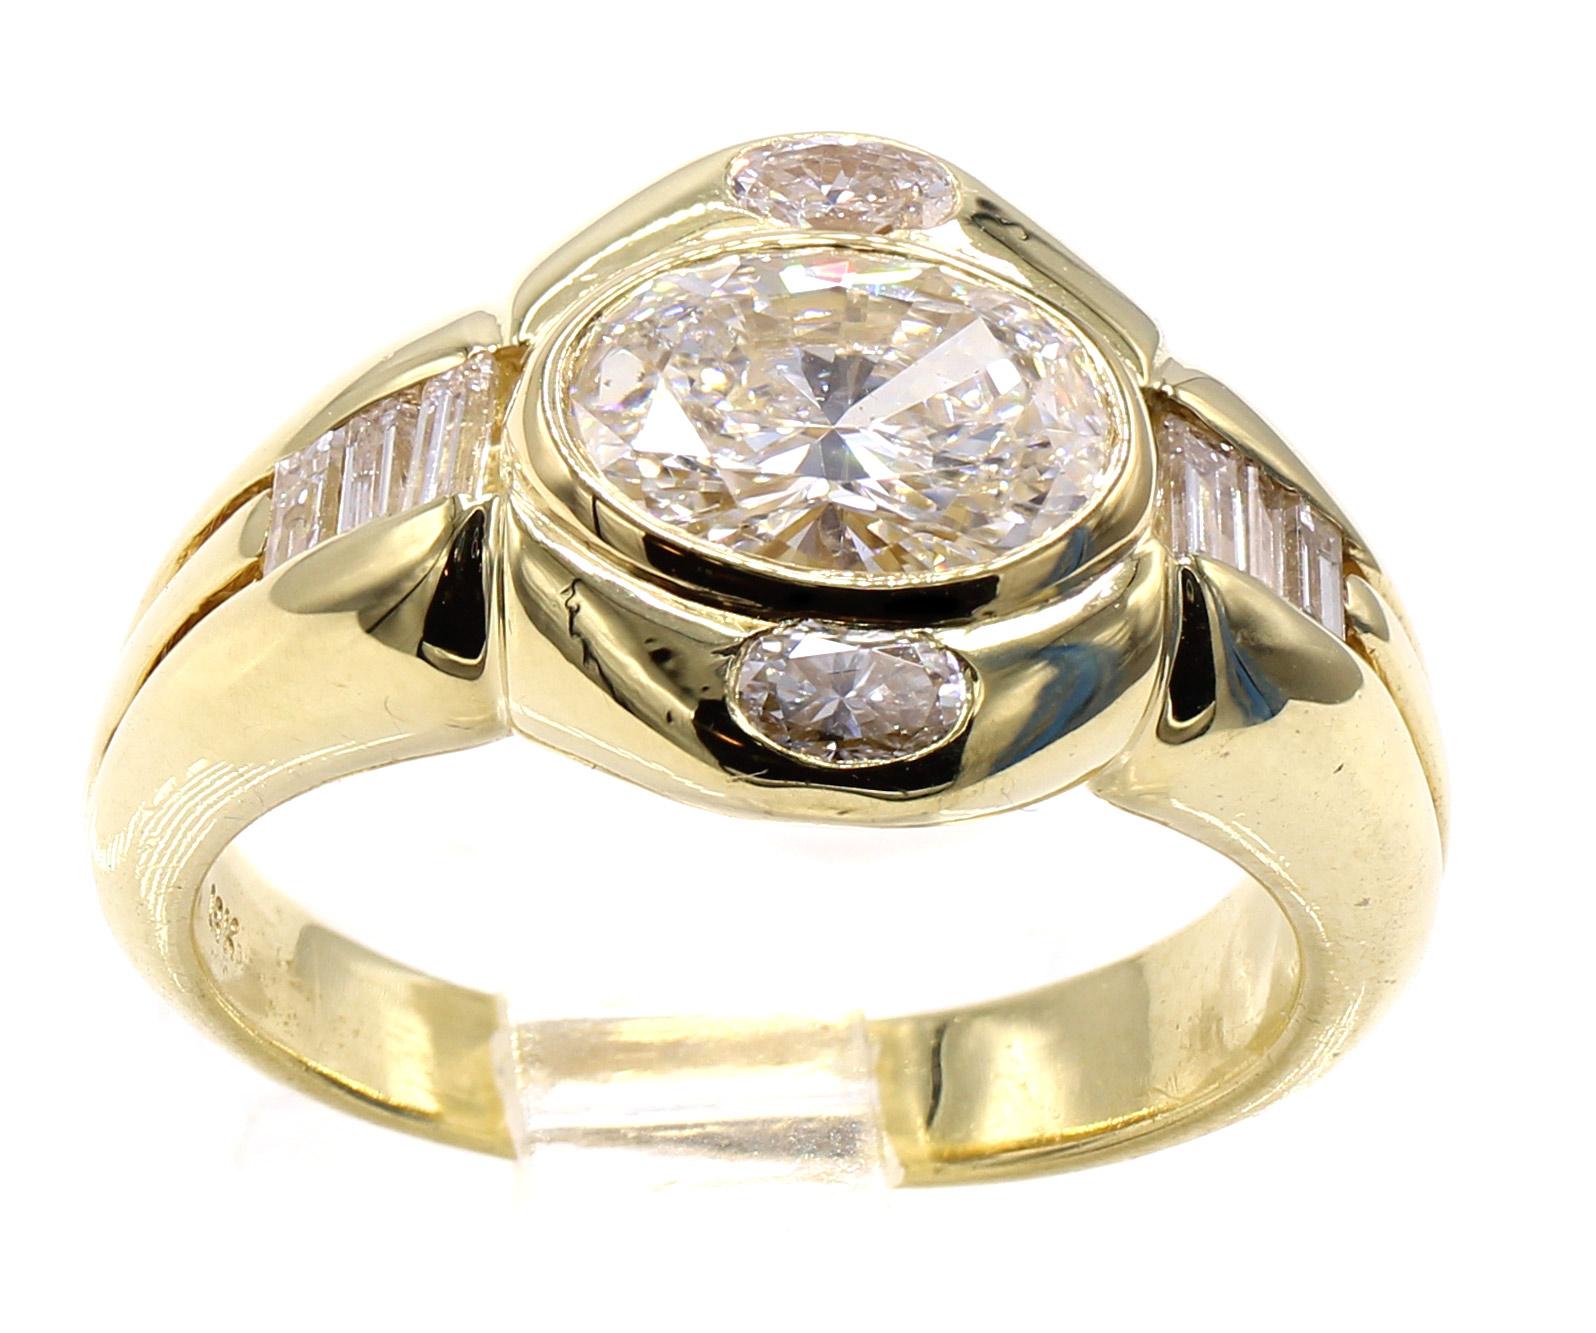 Beautifully designed and masterfully handcrafted in 18 Karat yellow gold this ring features a central oval brilliant cut diamond weighing 1.02 carats embellished by small oval cut diamonds on one side and baguette cut diamonds on the other. The well